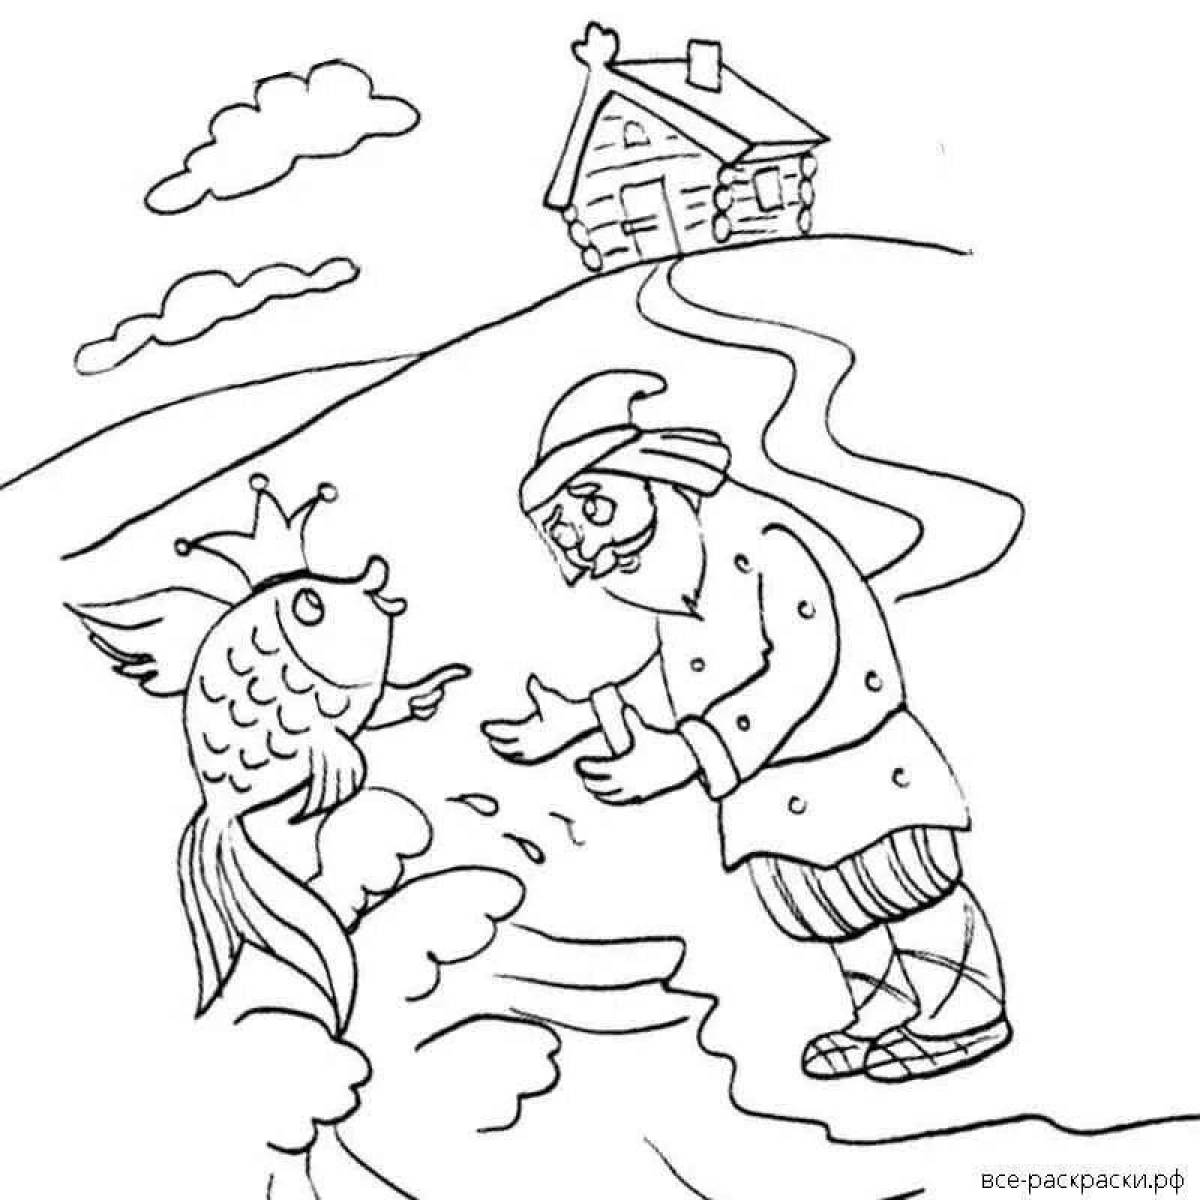 Mystical coloring book for the tale of the fisherman and the fish